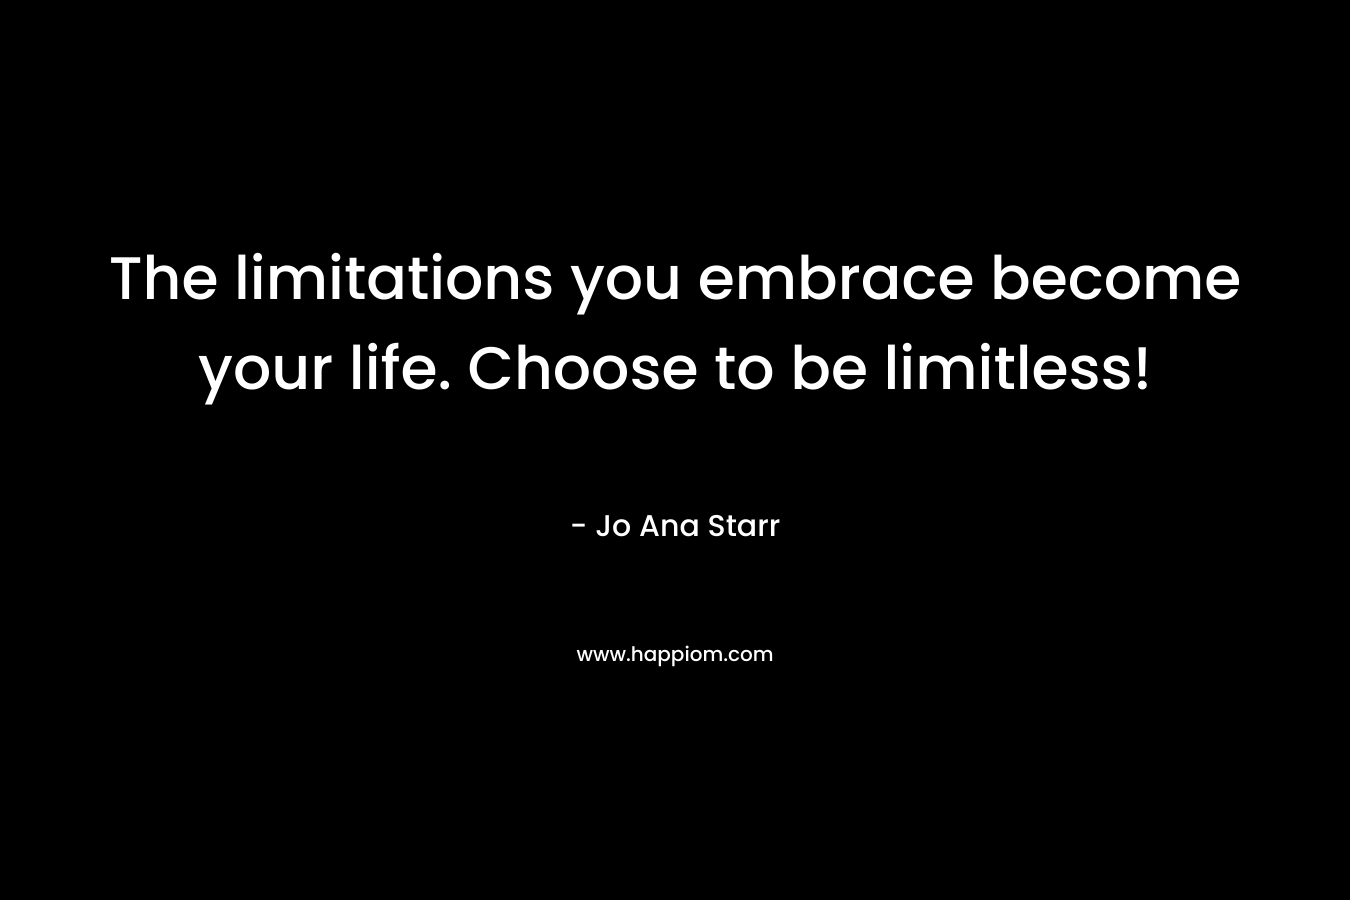 The limitations you embrace become your life. Choose to be limitless!